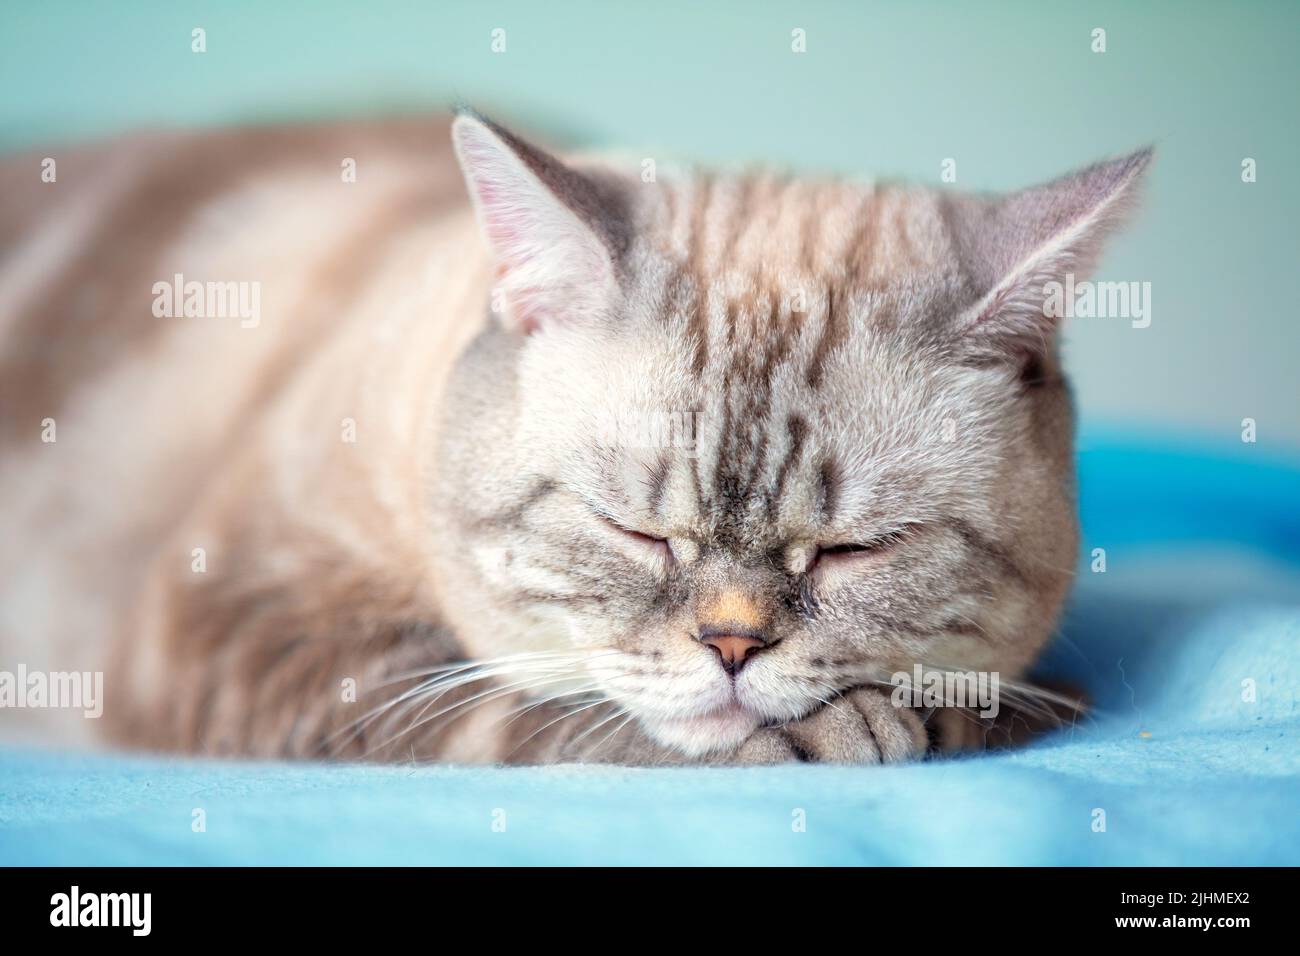 Siamese cat sleeping indoors on a blue blanket Stock Photo